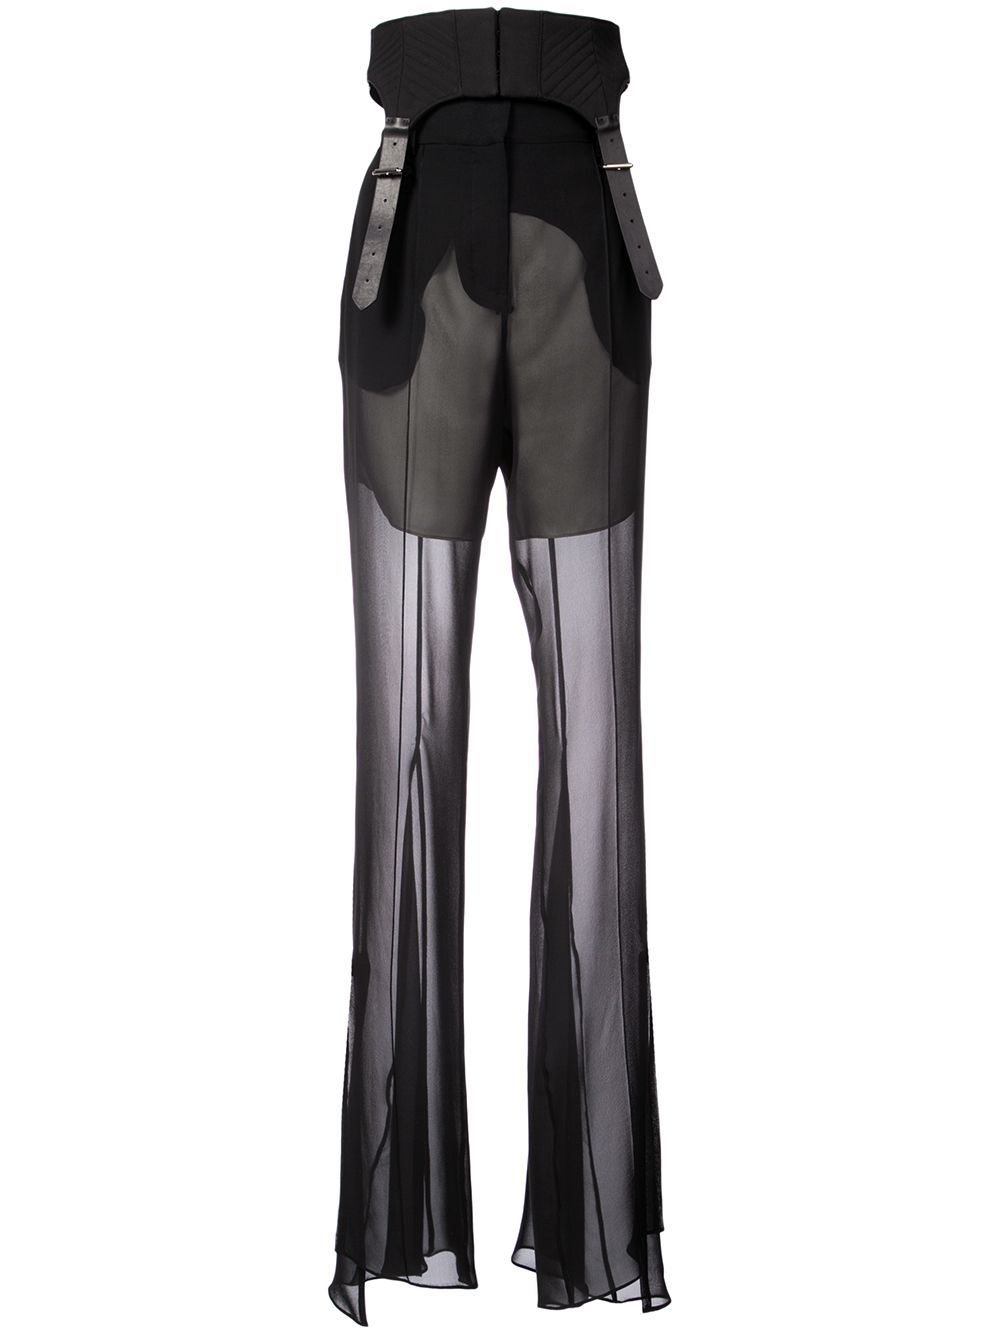 Vera Wang flared transparent styled trousers - Black | FarFetch US